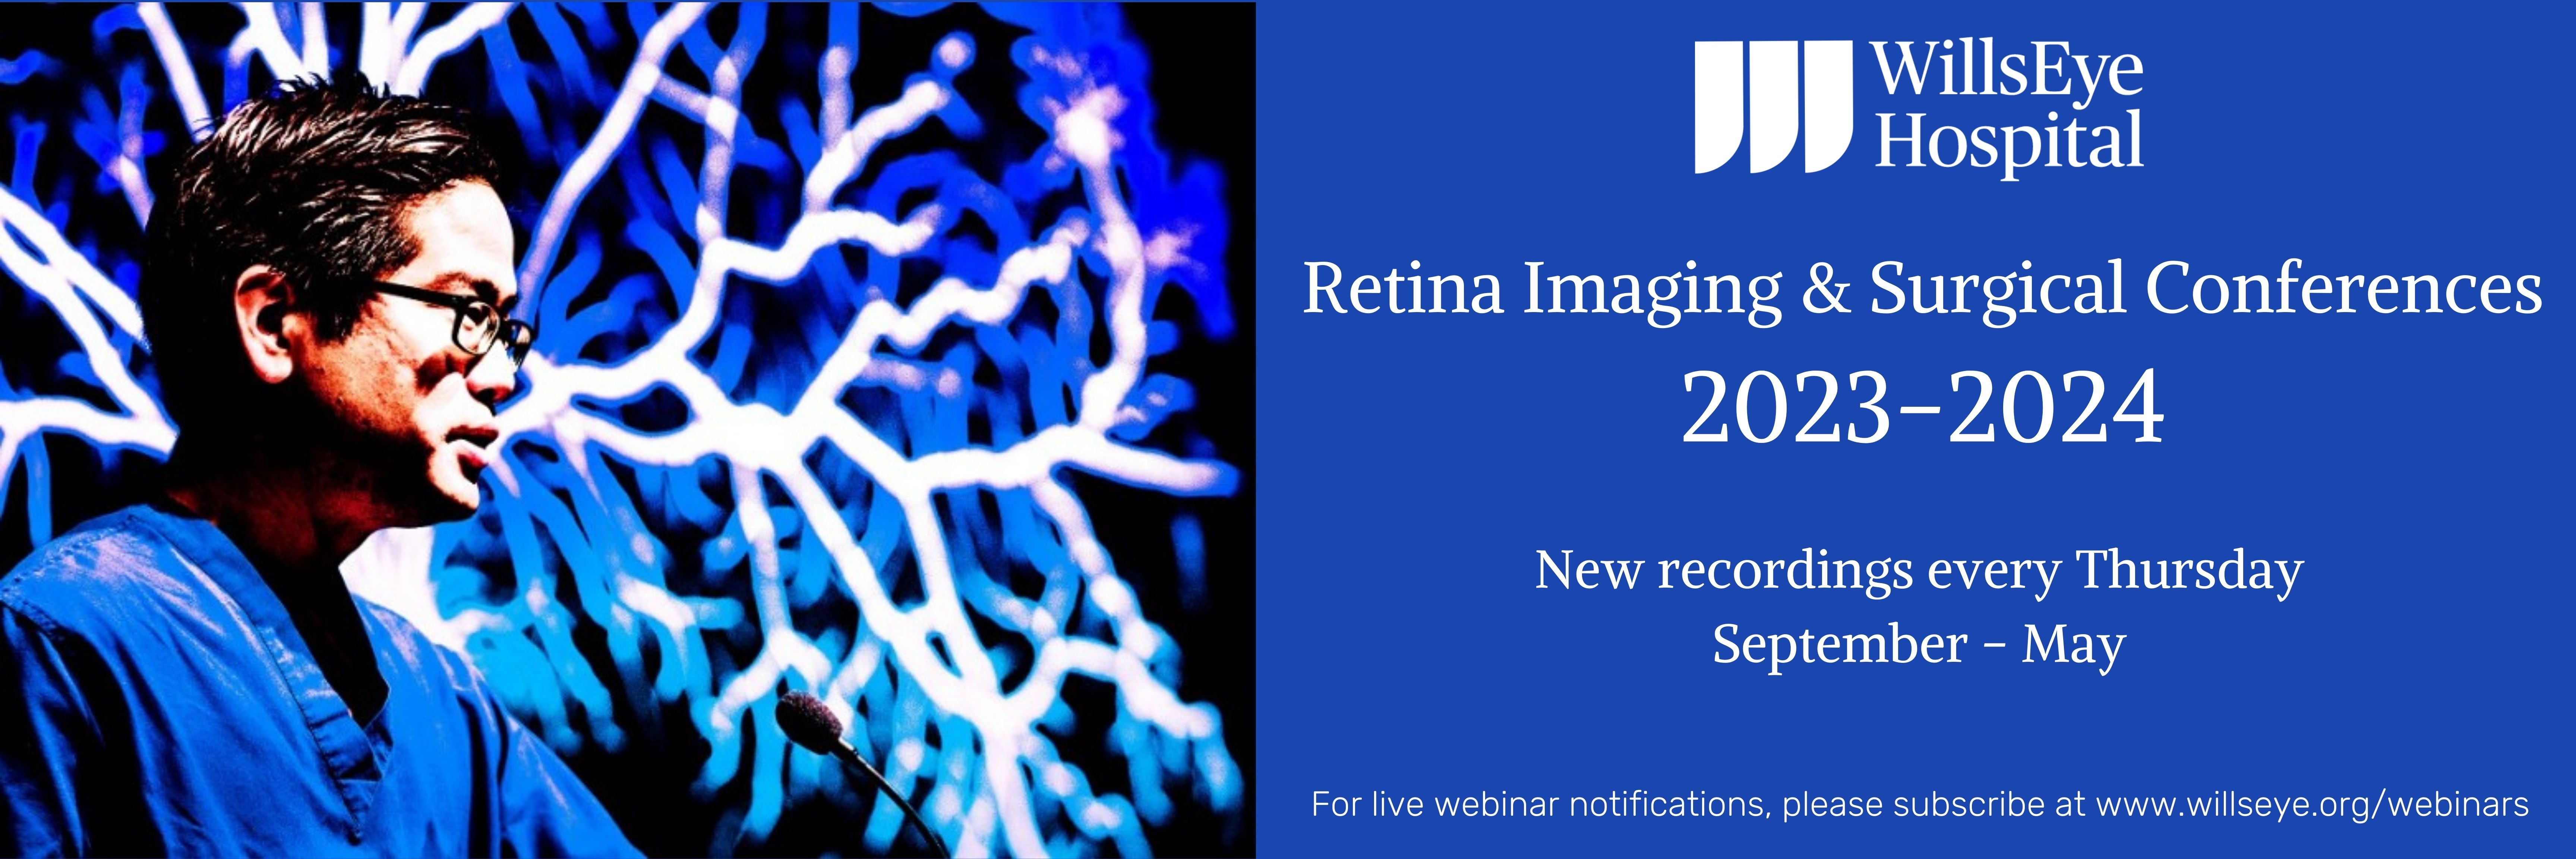 OnDemand Retina Imaging & Surgical Conferences 2023-2024 Academic Year [NON-CME] Banner